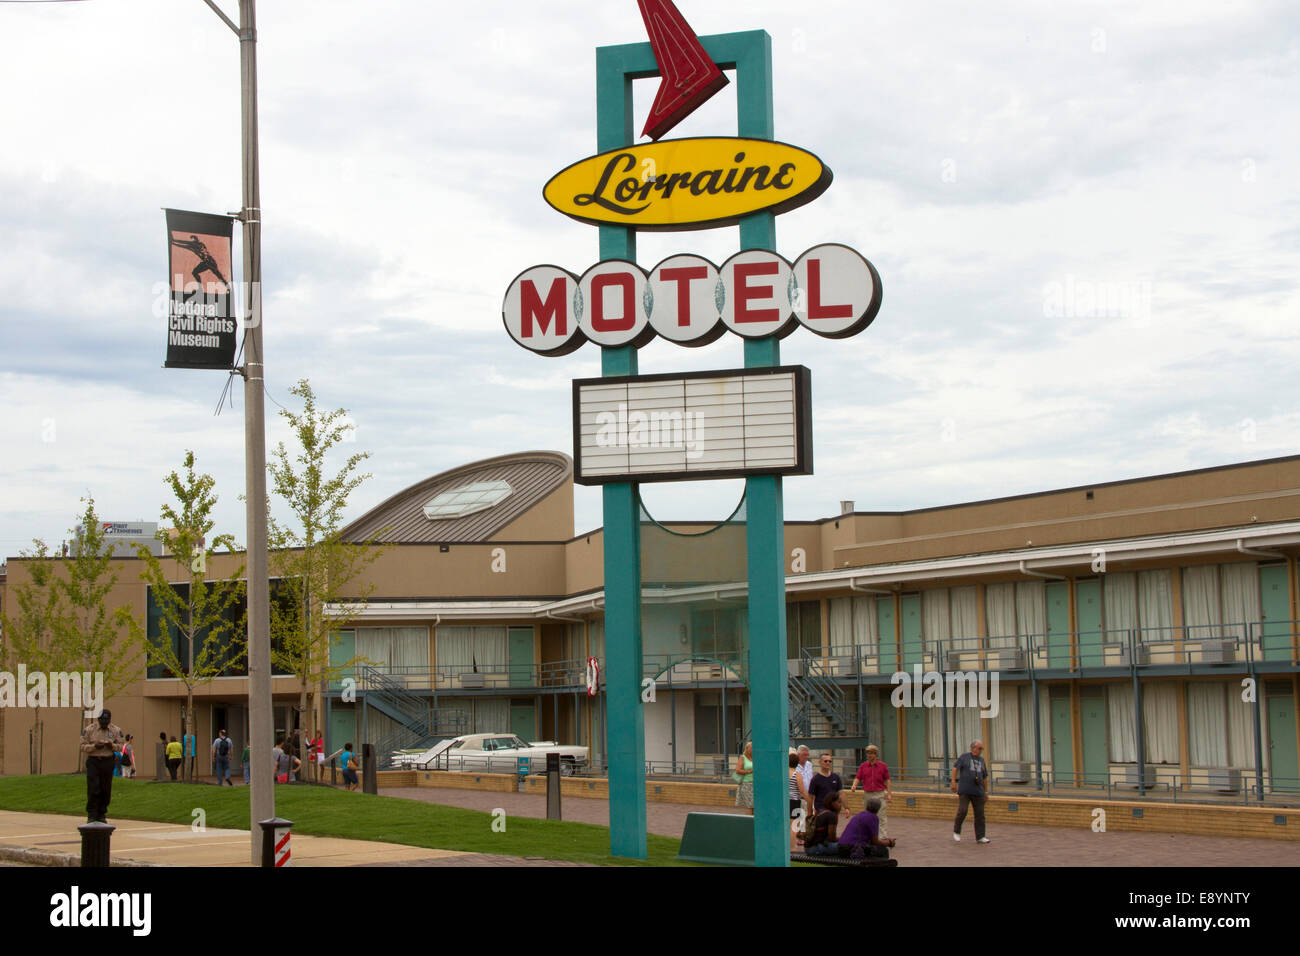 National Civil Rights Museum located in the old Lorraine Motel, site of the Martin Luther King, Jr assassination, in Memphis TN Stock Photo